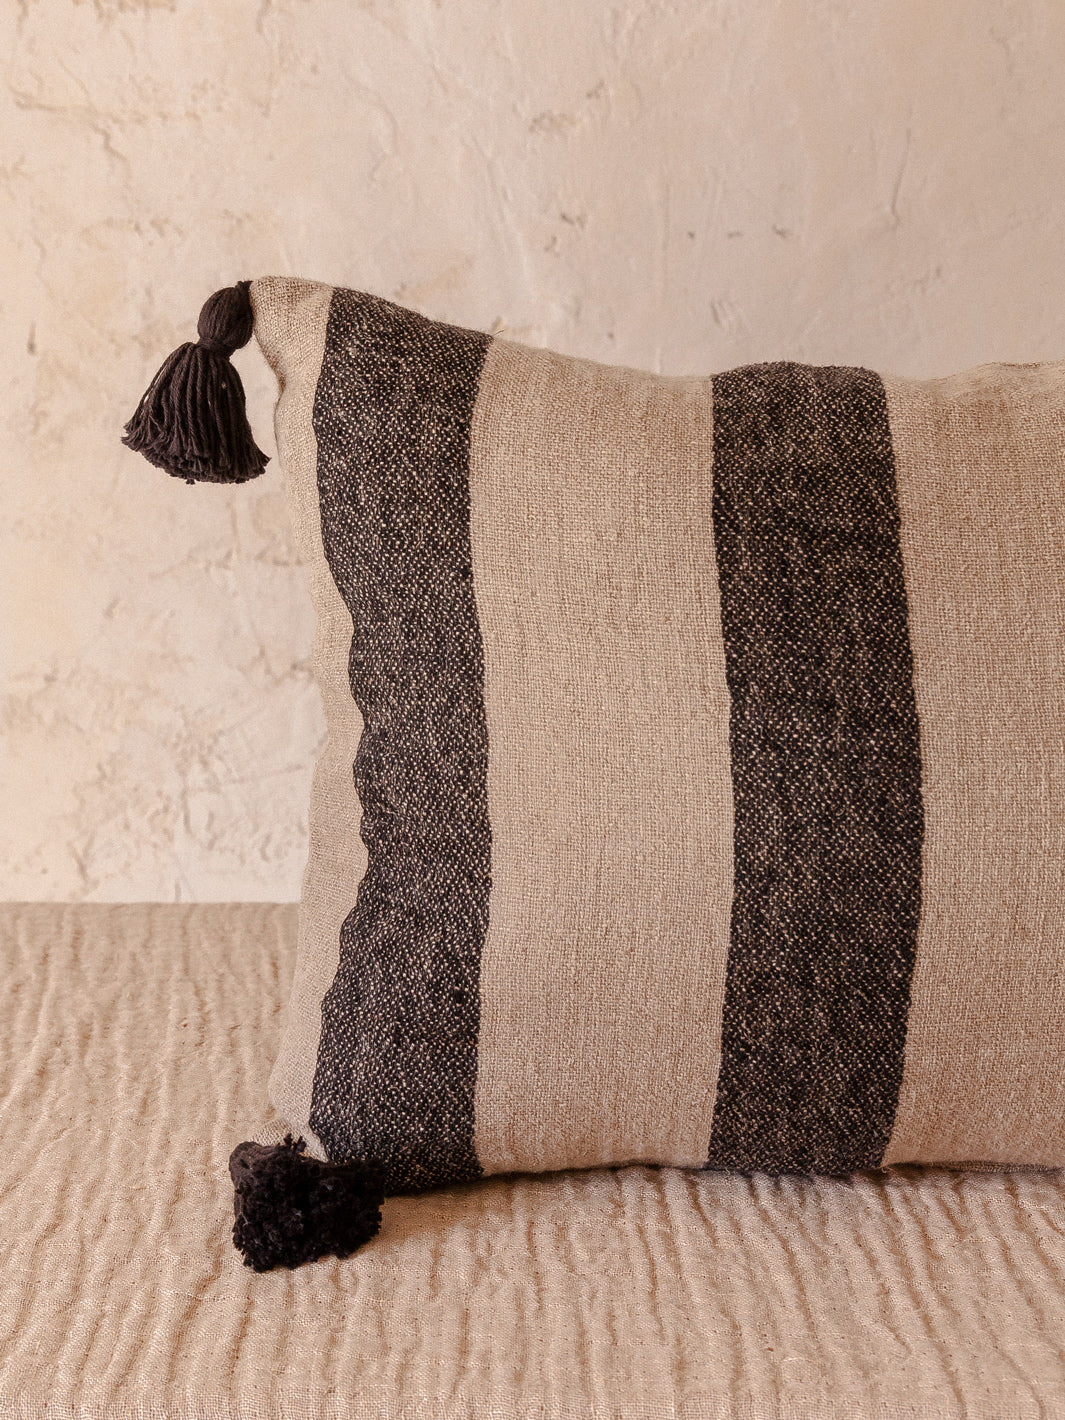 Striped linen cushion with tassels